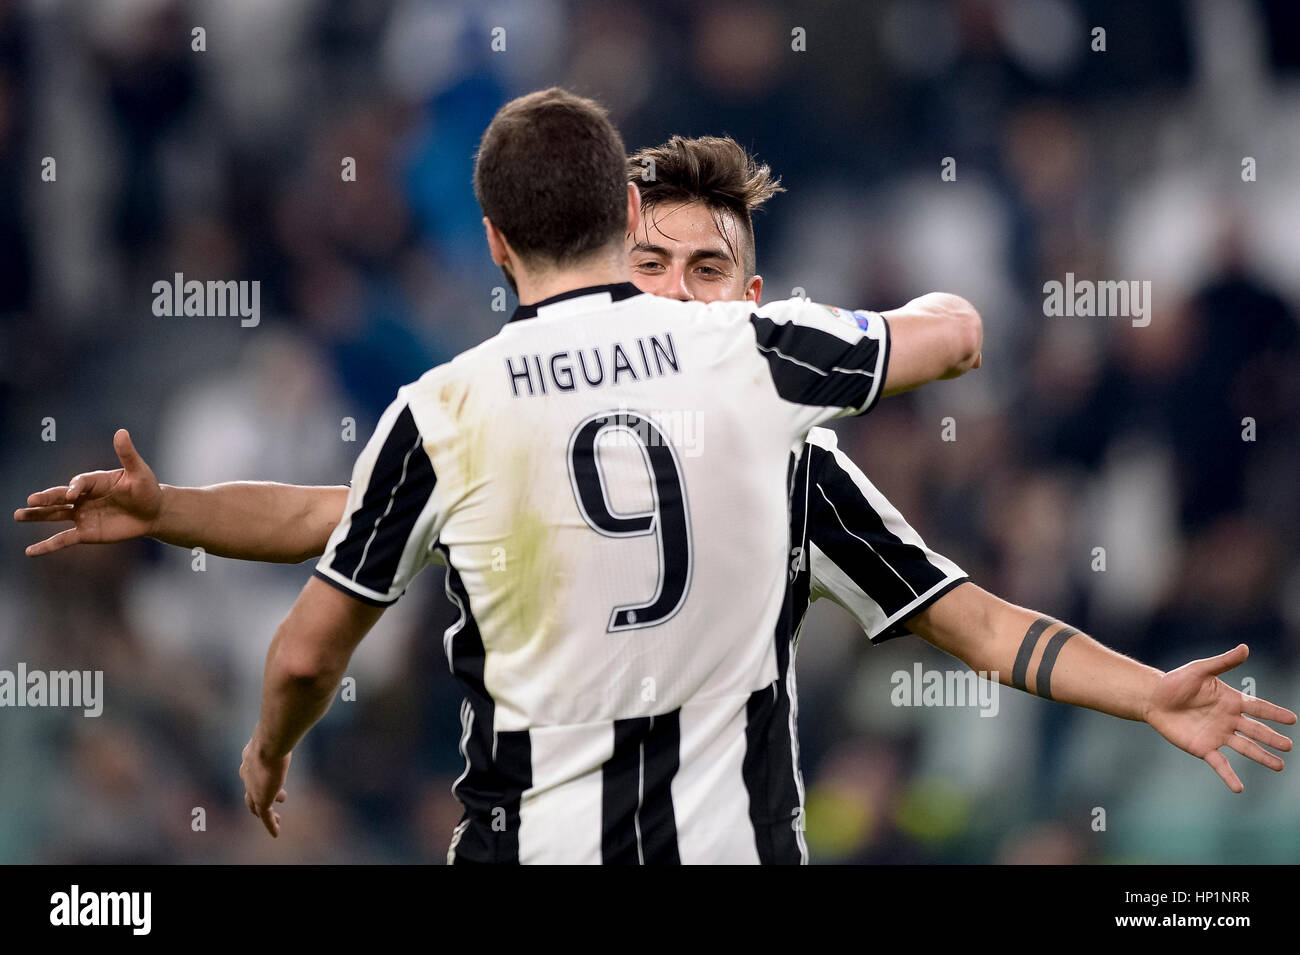 Turin, Italy. 17 February, 2017. Paulo Dybala (right) of Juventus FC celebrates with Gonzalo Higuain after scoring a goal during the Serie A football match between Juventus FC and US Citta di Palermo. Credit: Nicolò Campo/Alamy Live News Stock Photo